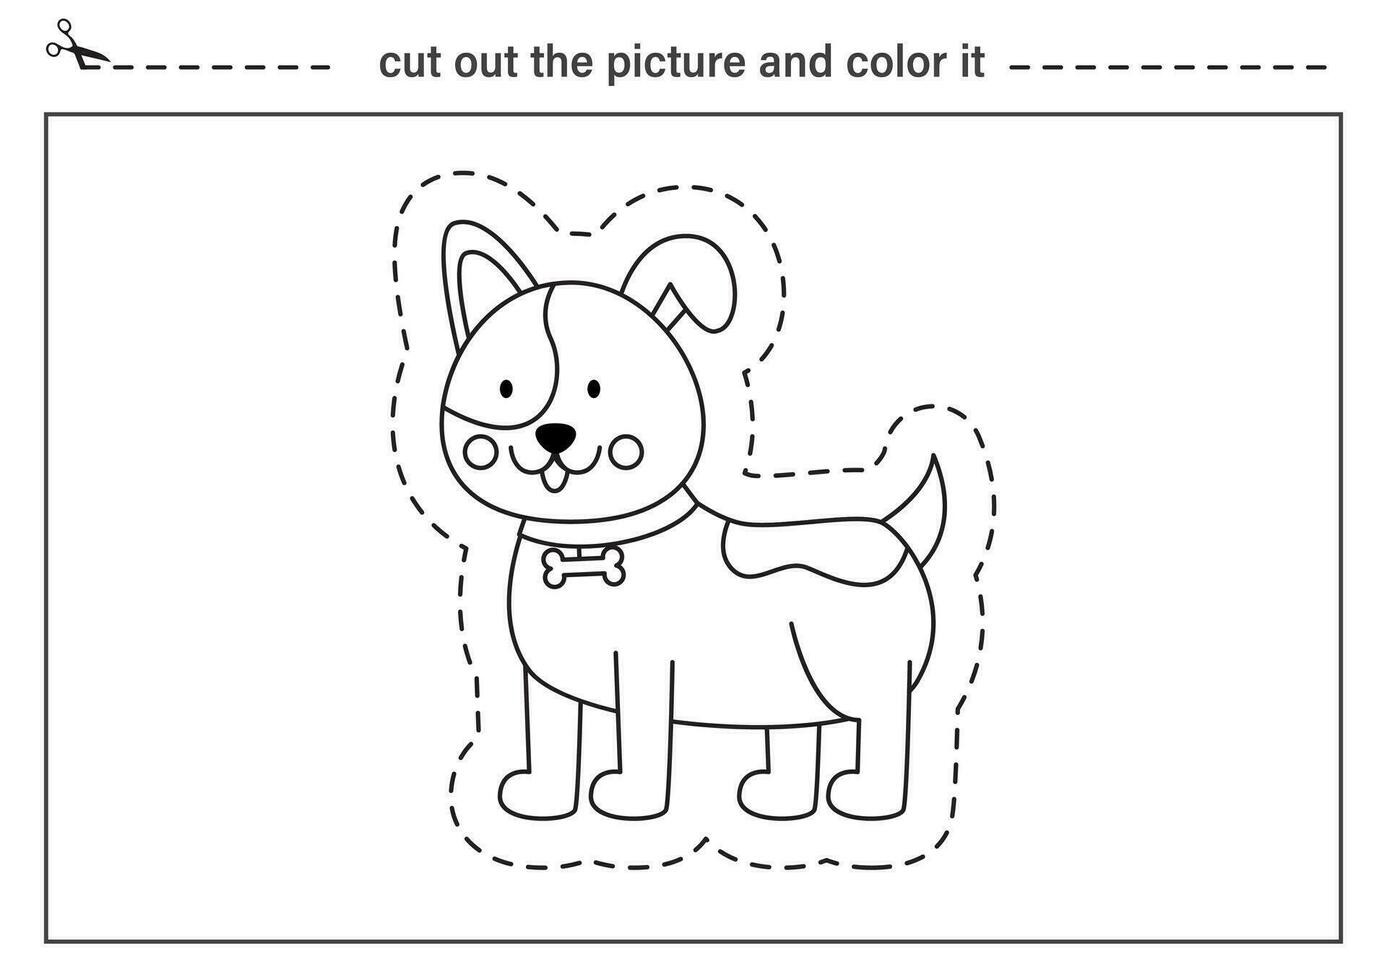 Cutting practice for kids. Black and white worksheet. Cut out and